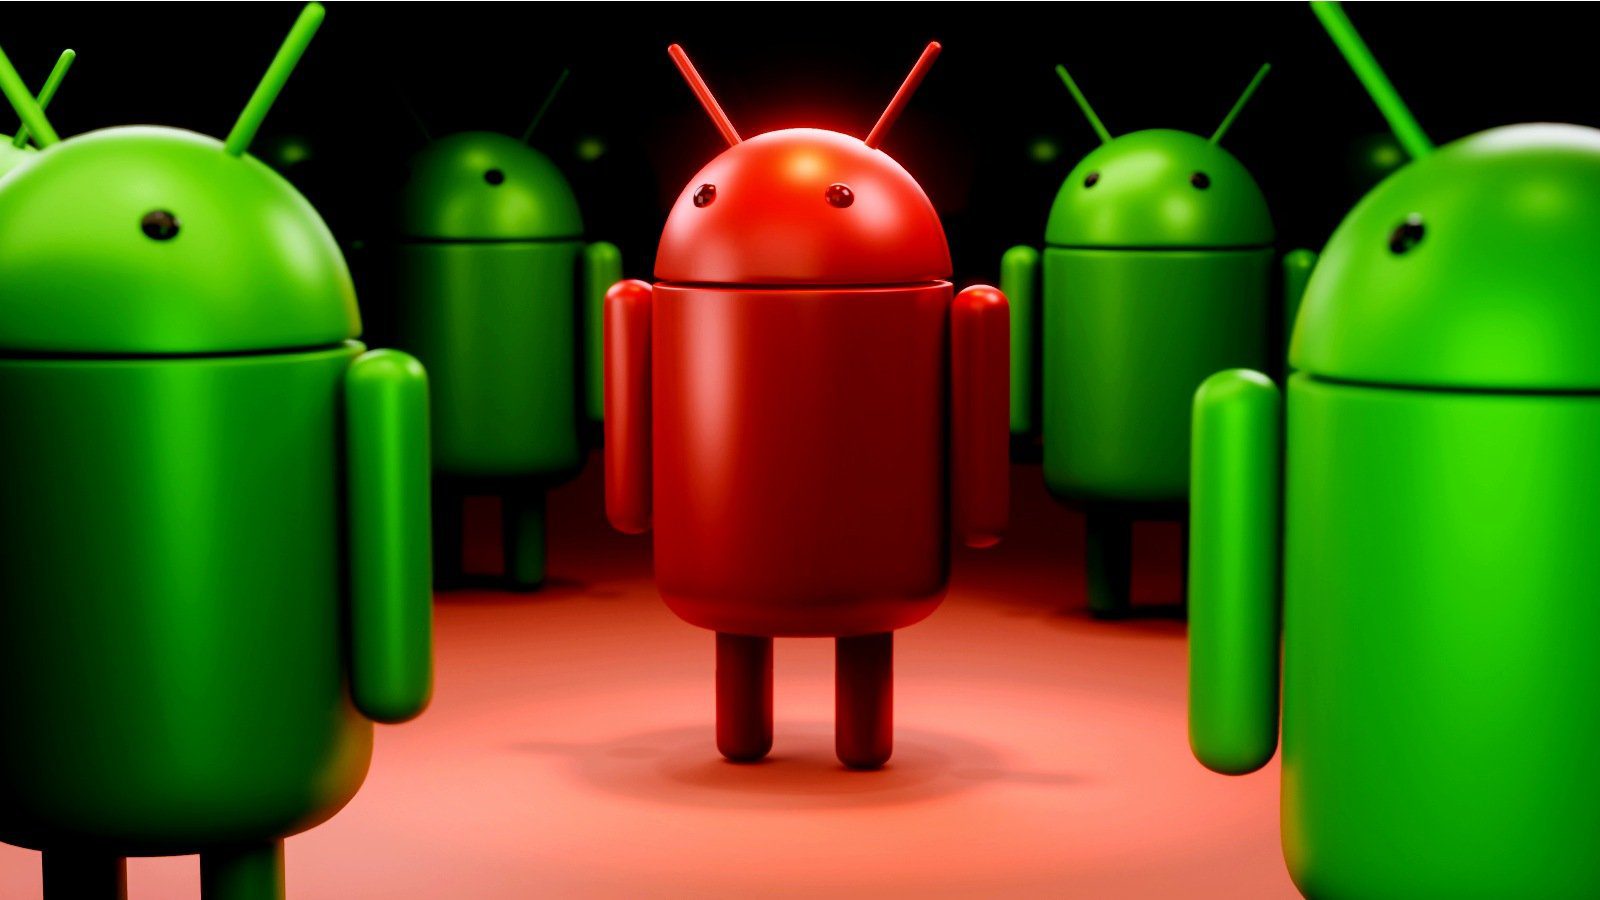 New Android FluHorse malware steals your passwords, 2FA codes – Source: www.bleepingcomputer.com